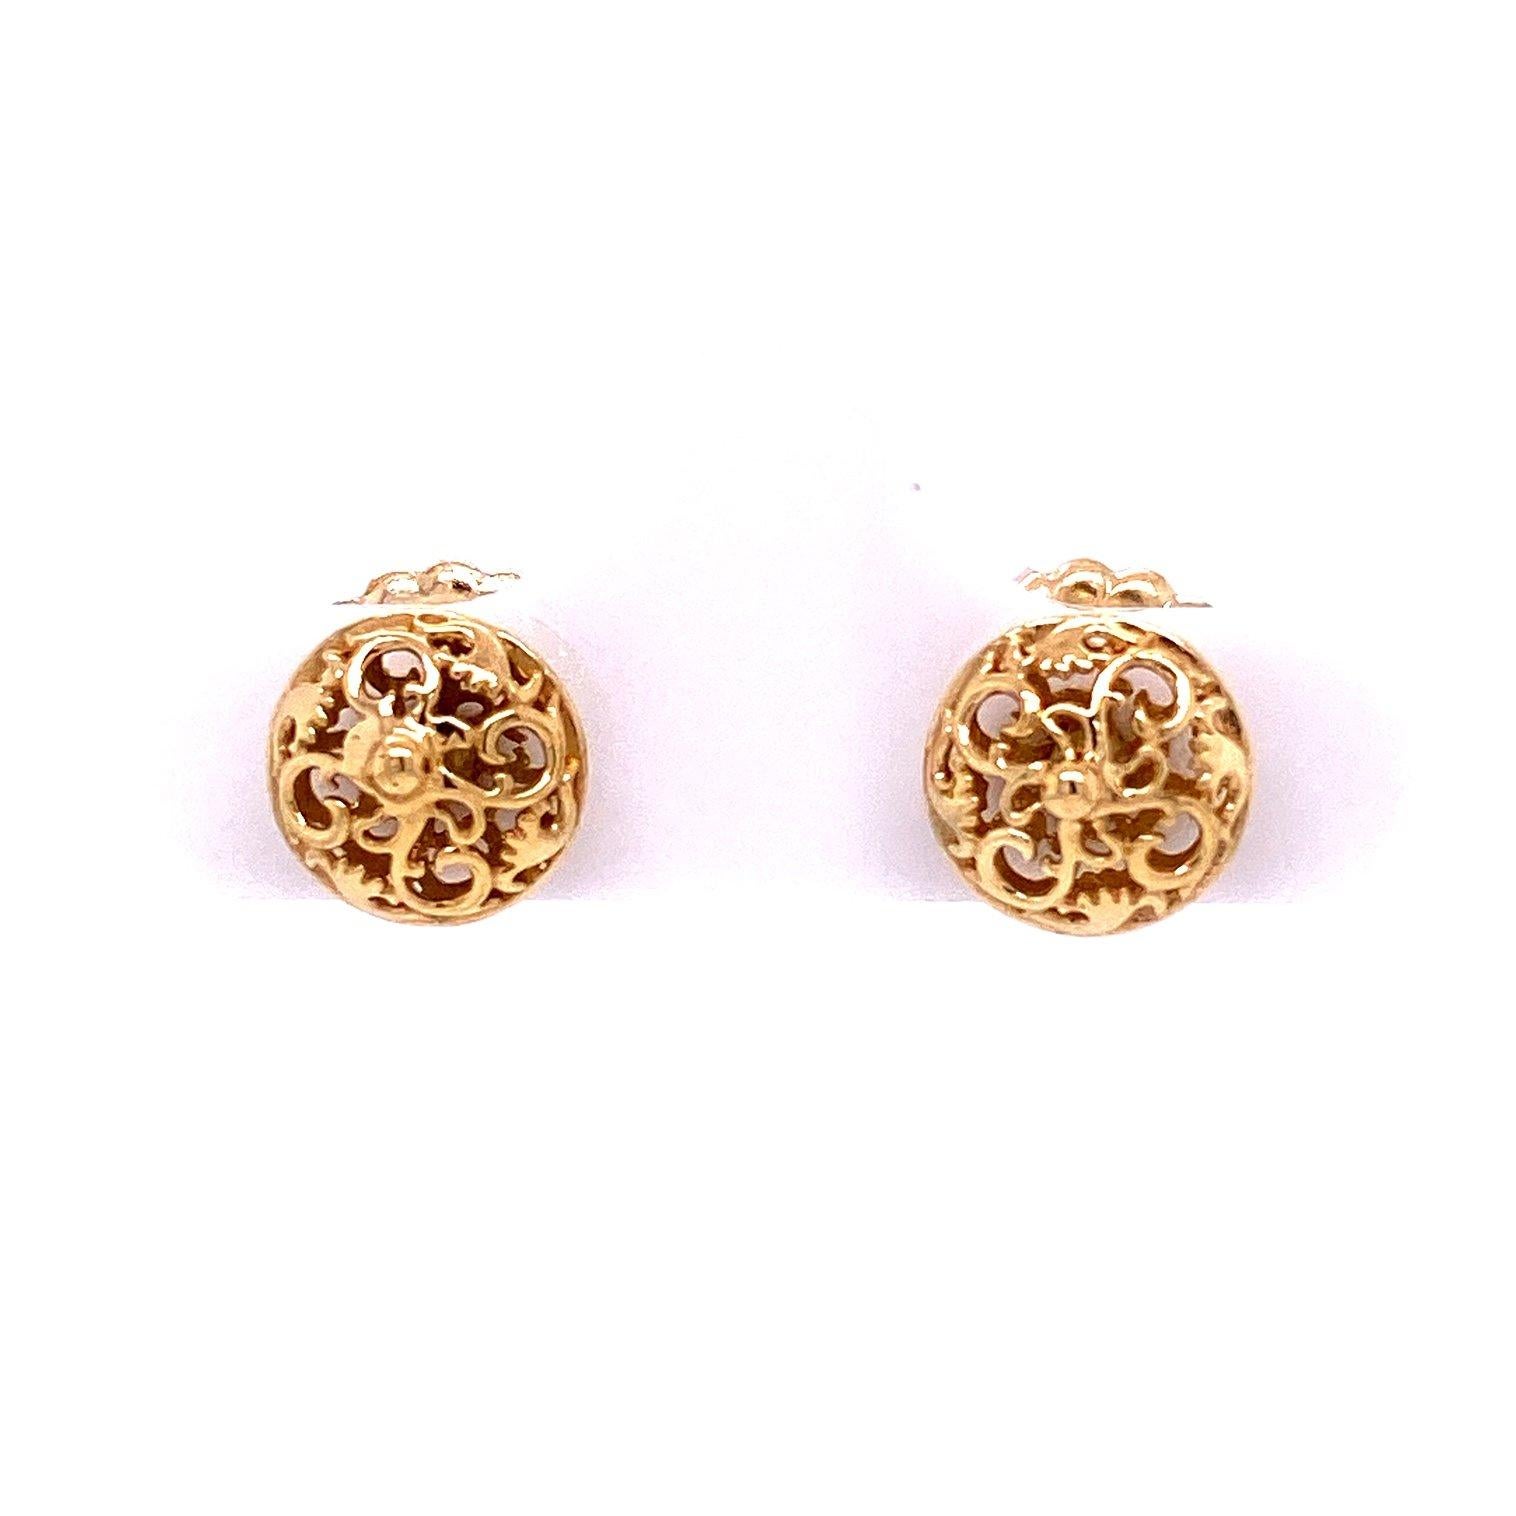 A pair of 18k yellow gold scroll stud earrings, with a pair of carved peach druzy wing jackets with 18k yellow gold. These earrings were made and designed by llyn strong.

Items sold separately upon request.